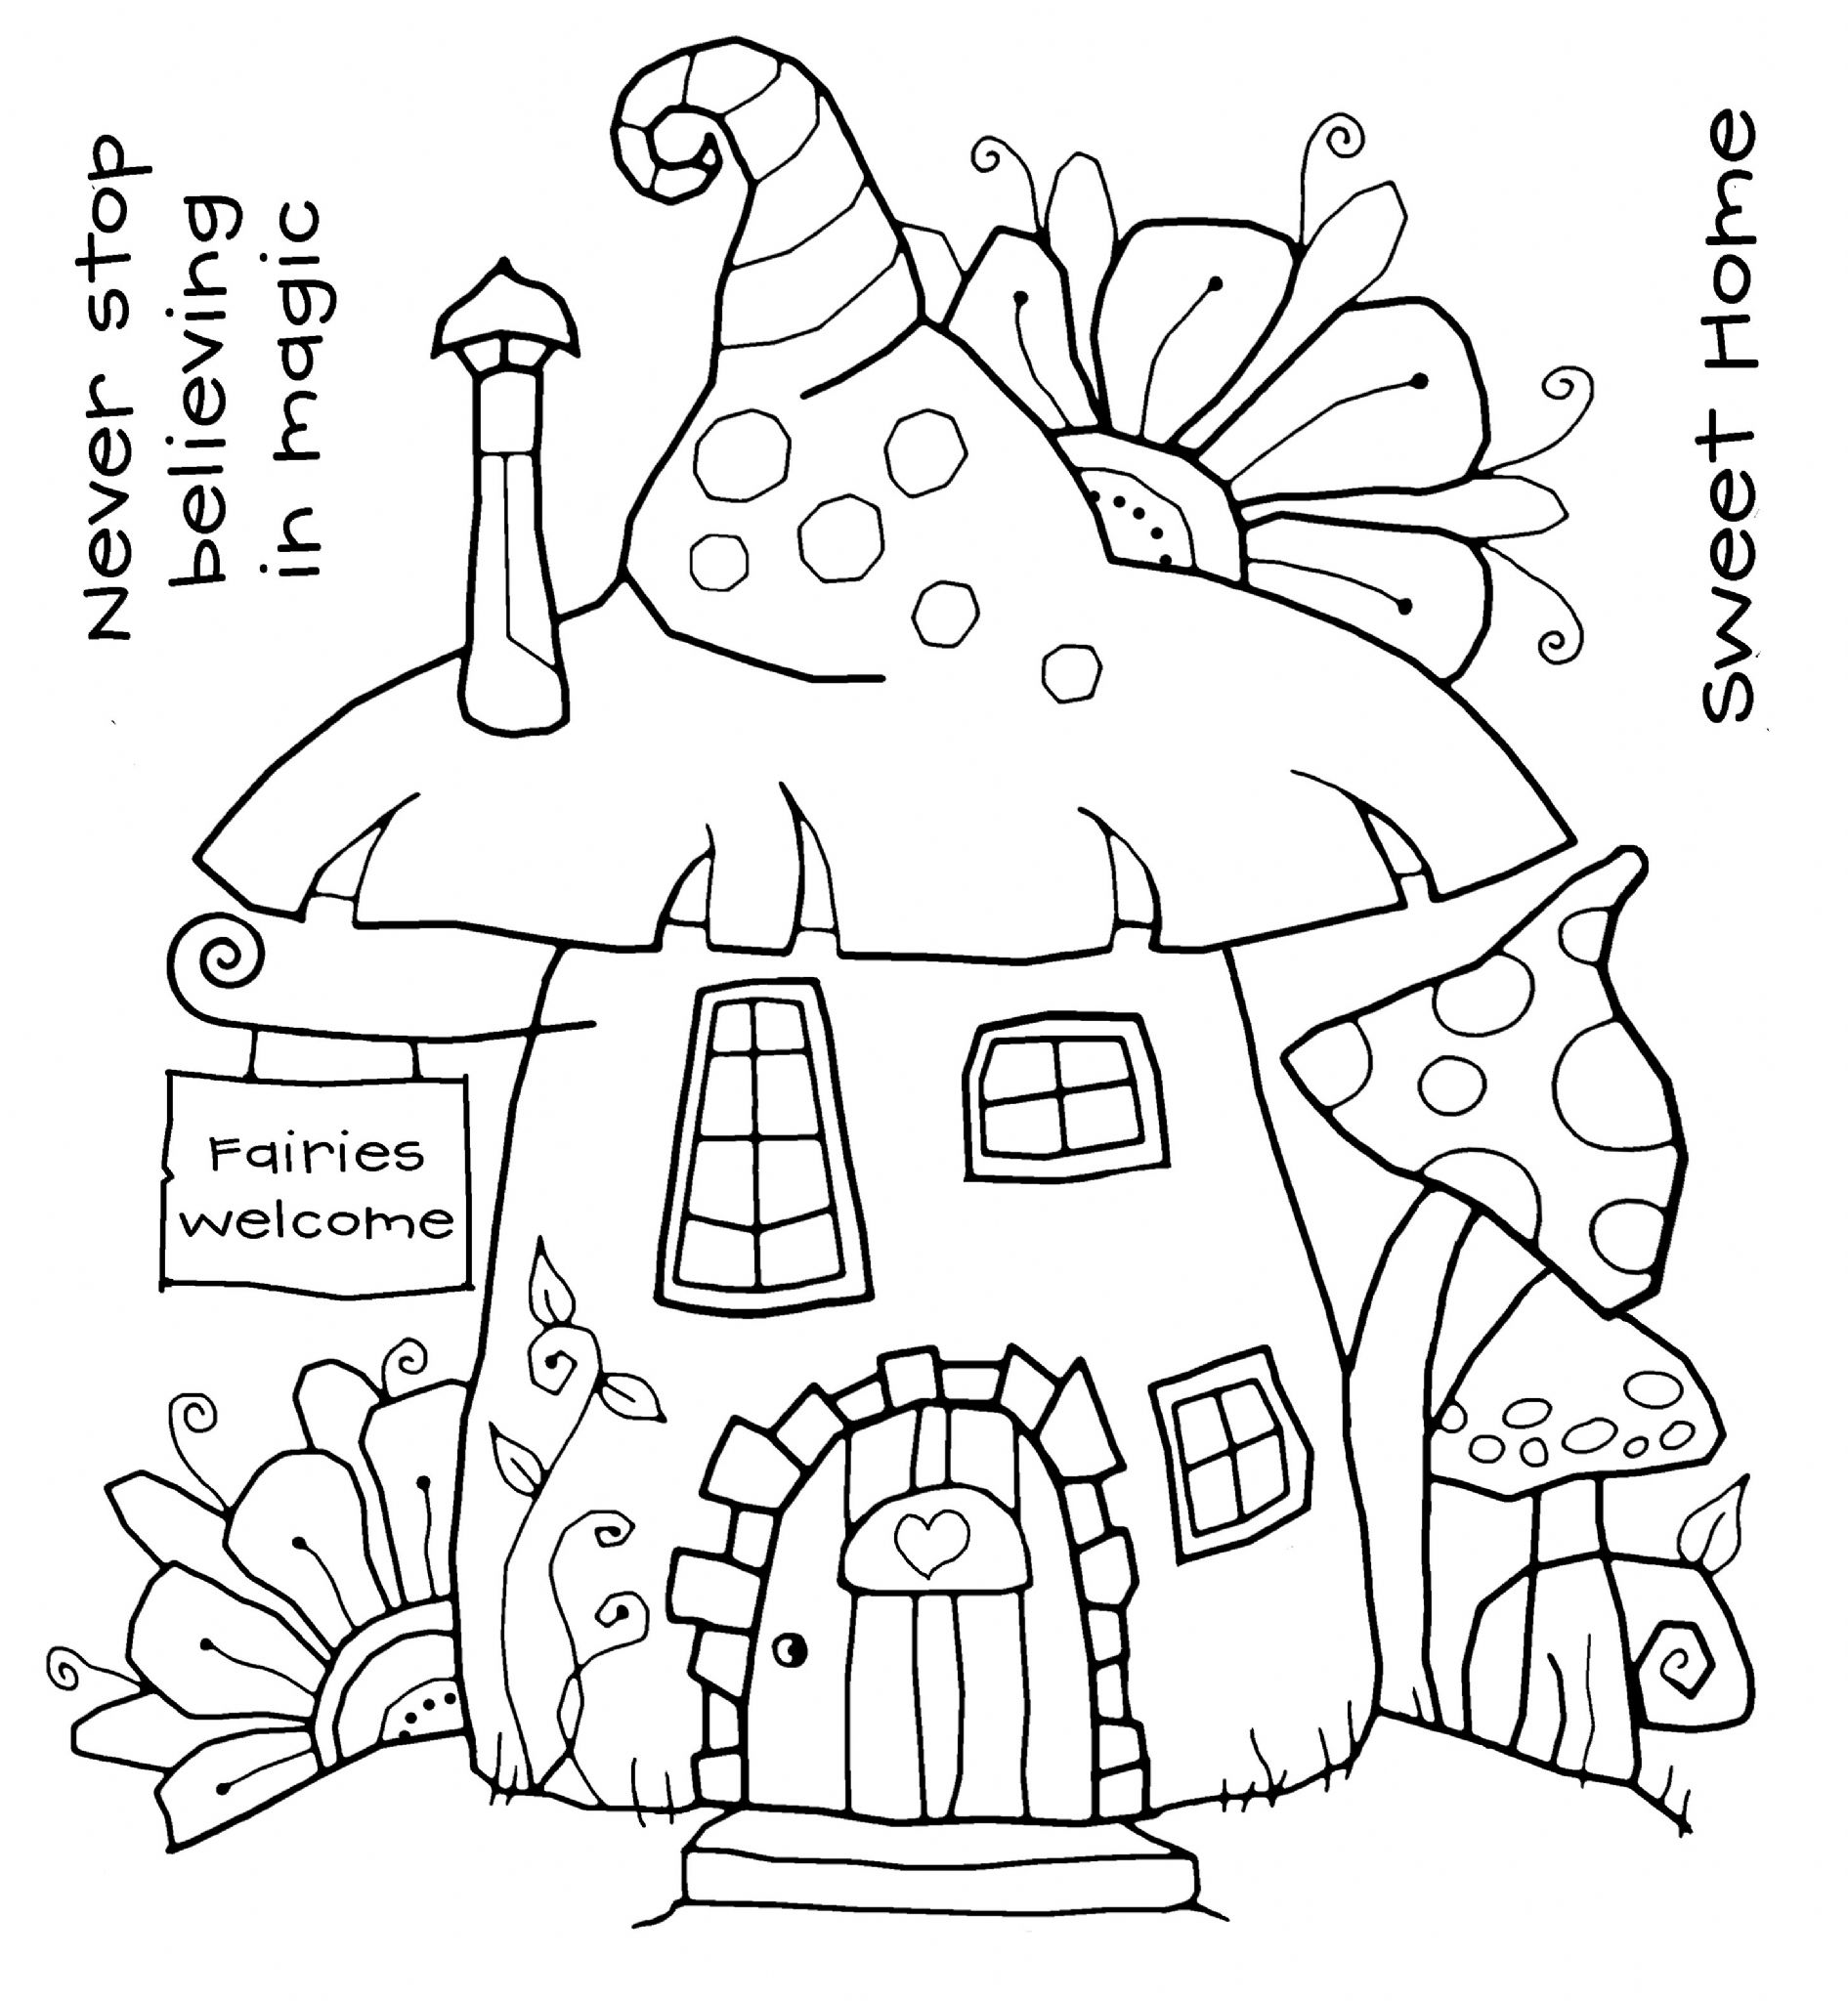 Woodware - Fairy House Drawing. 